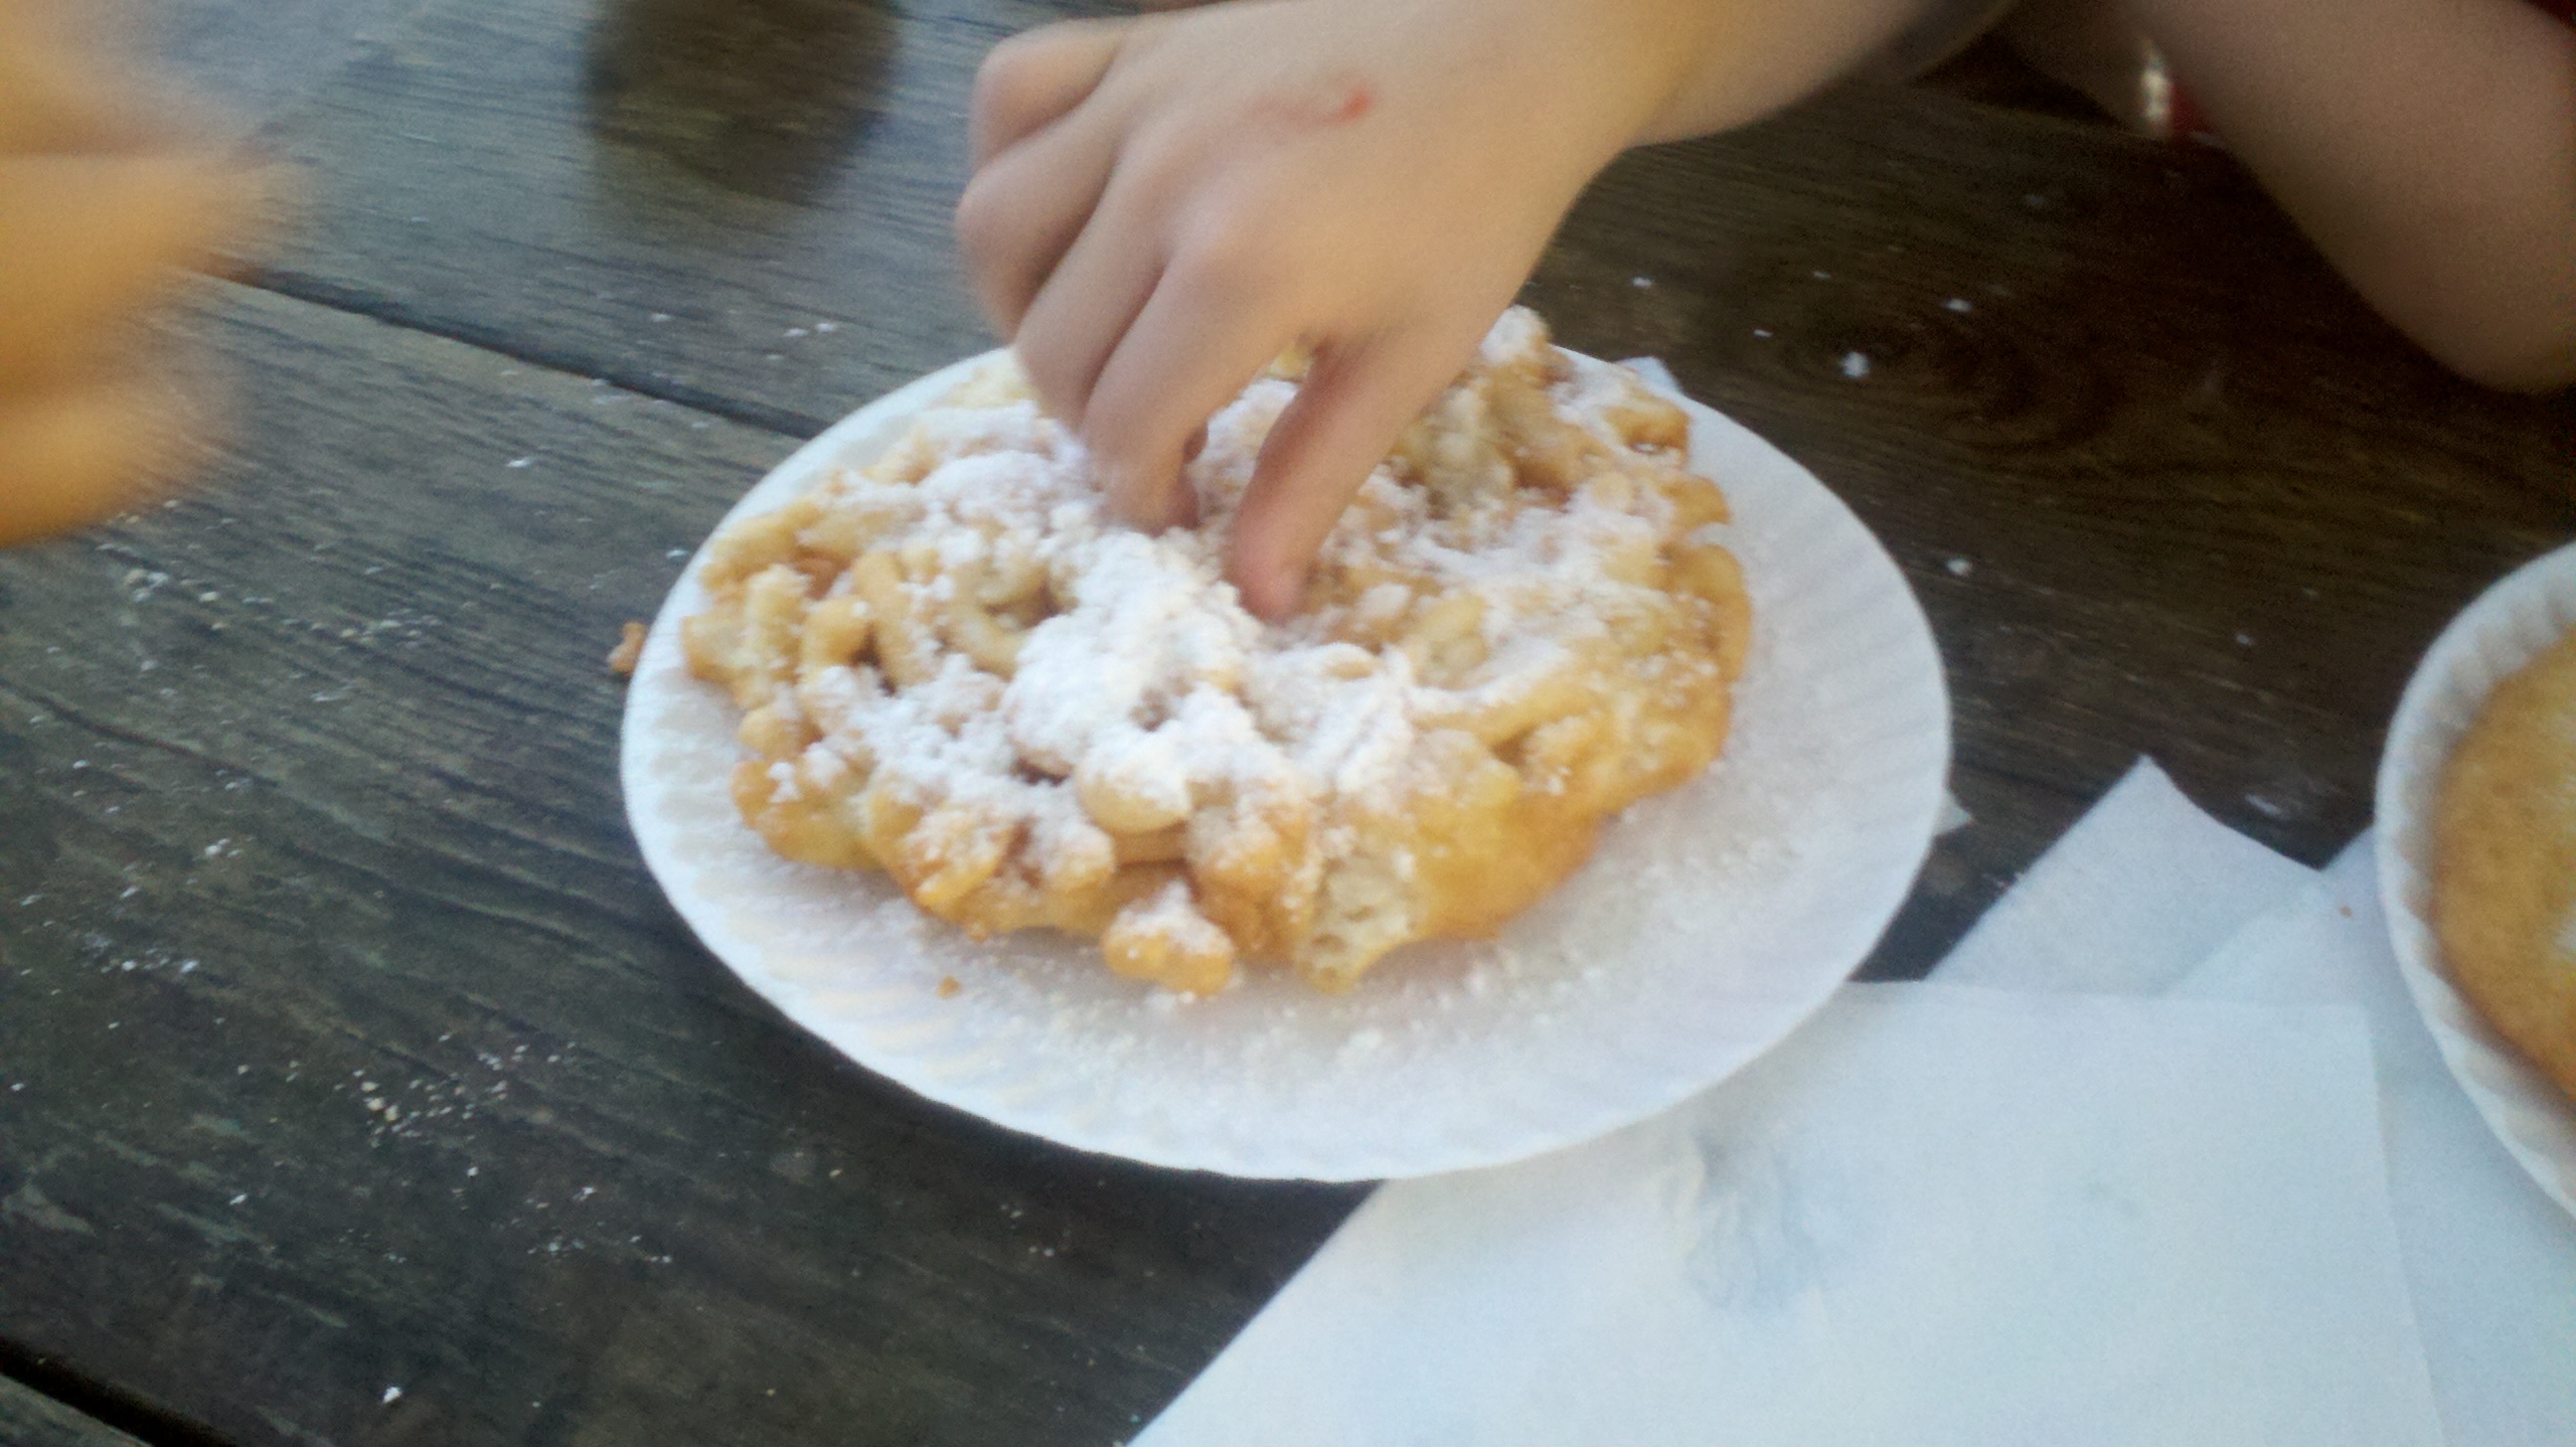 FC Eating the Funnel Cake